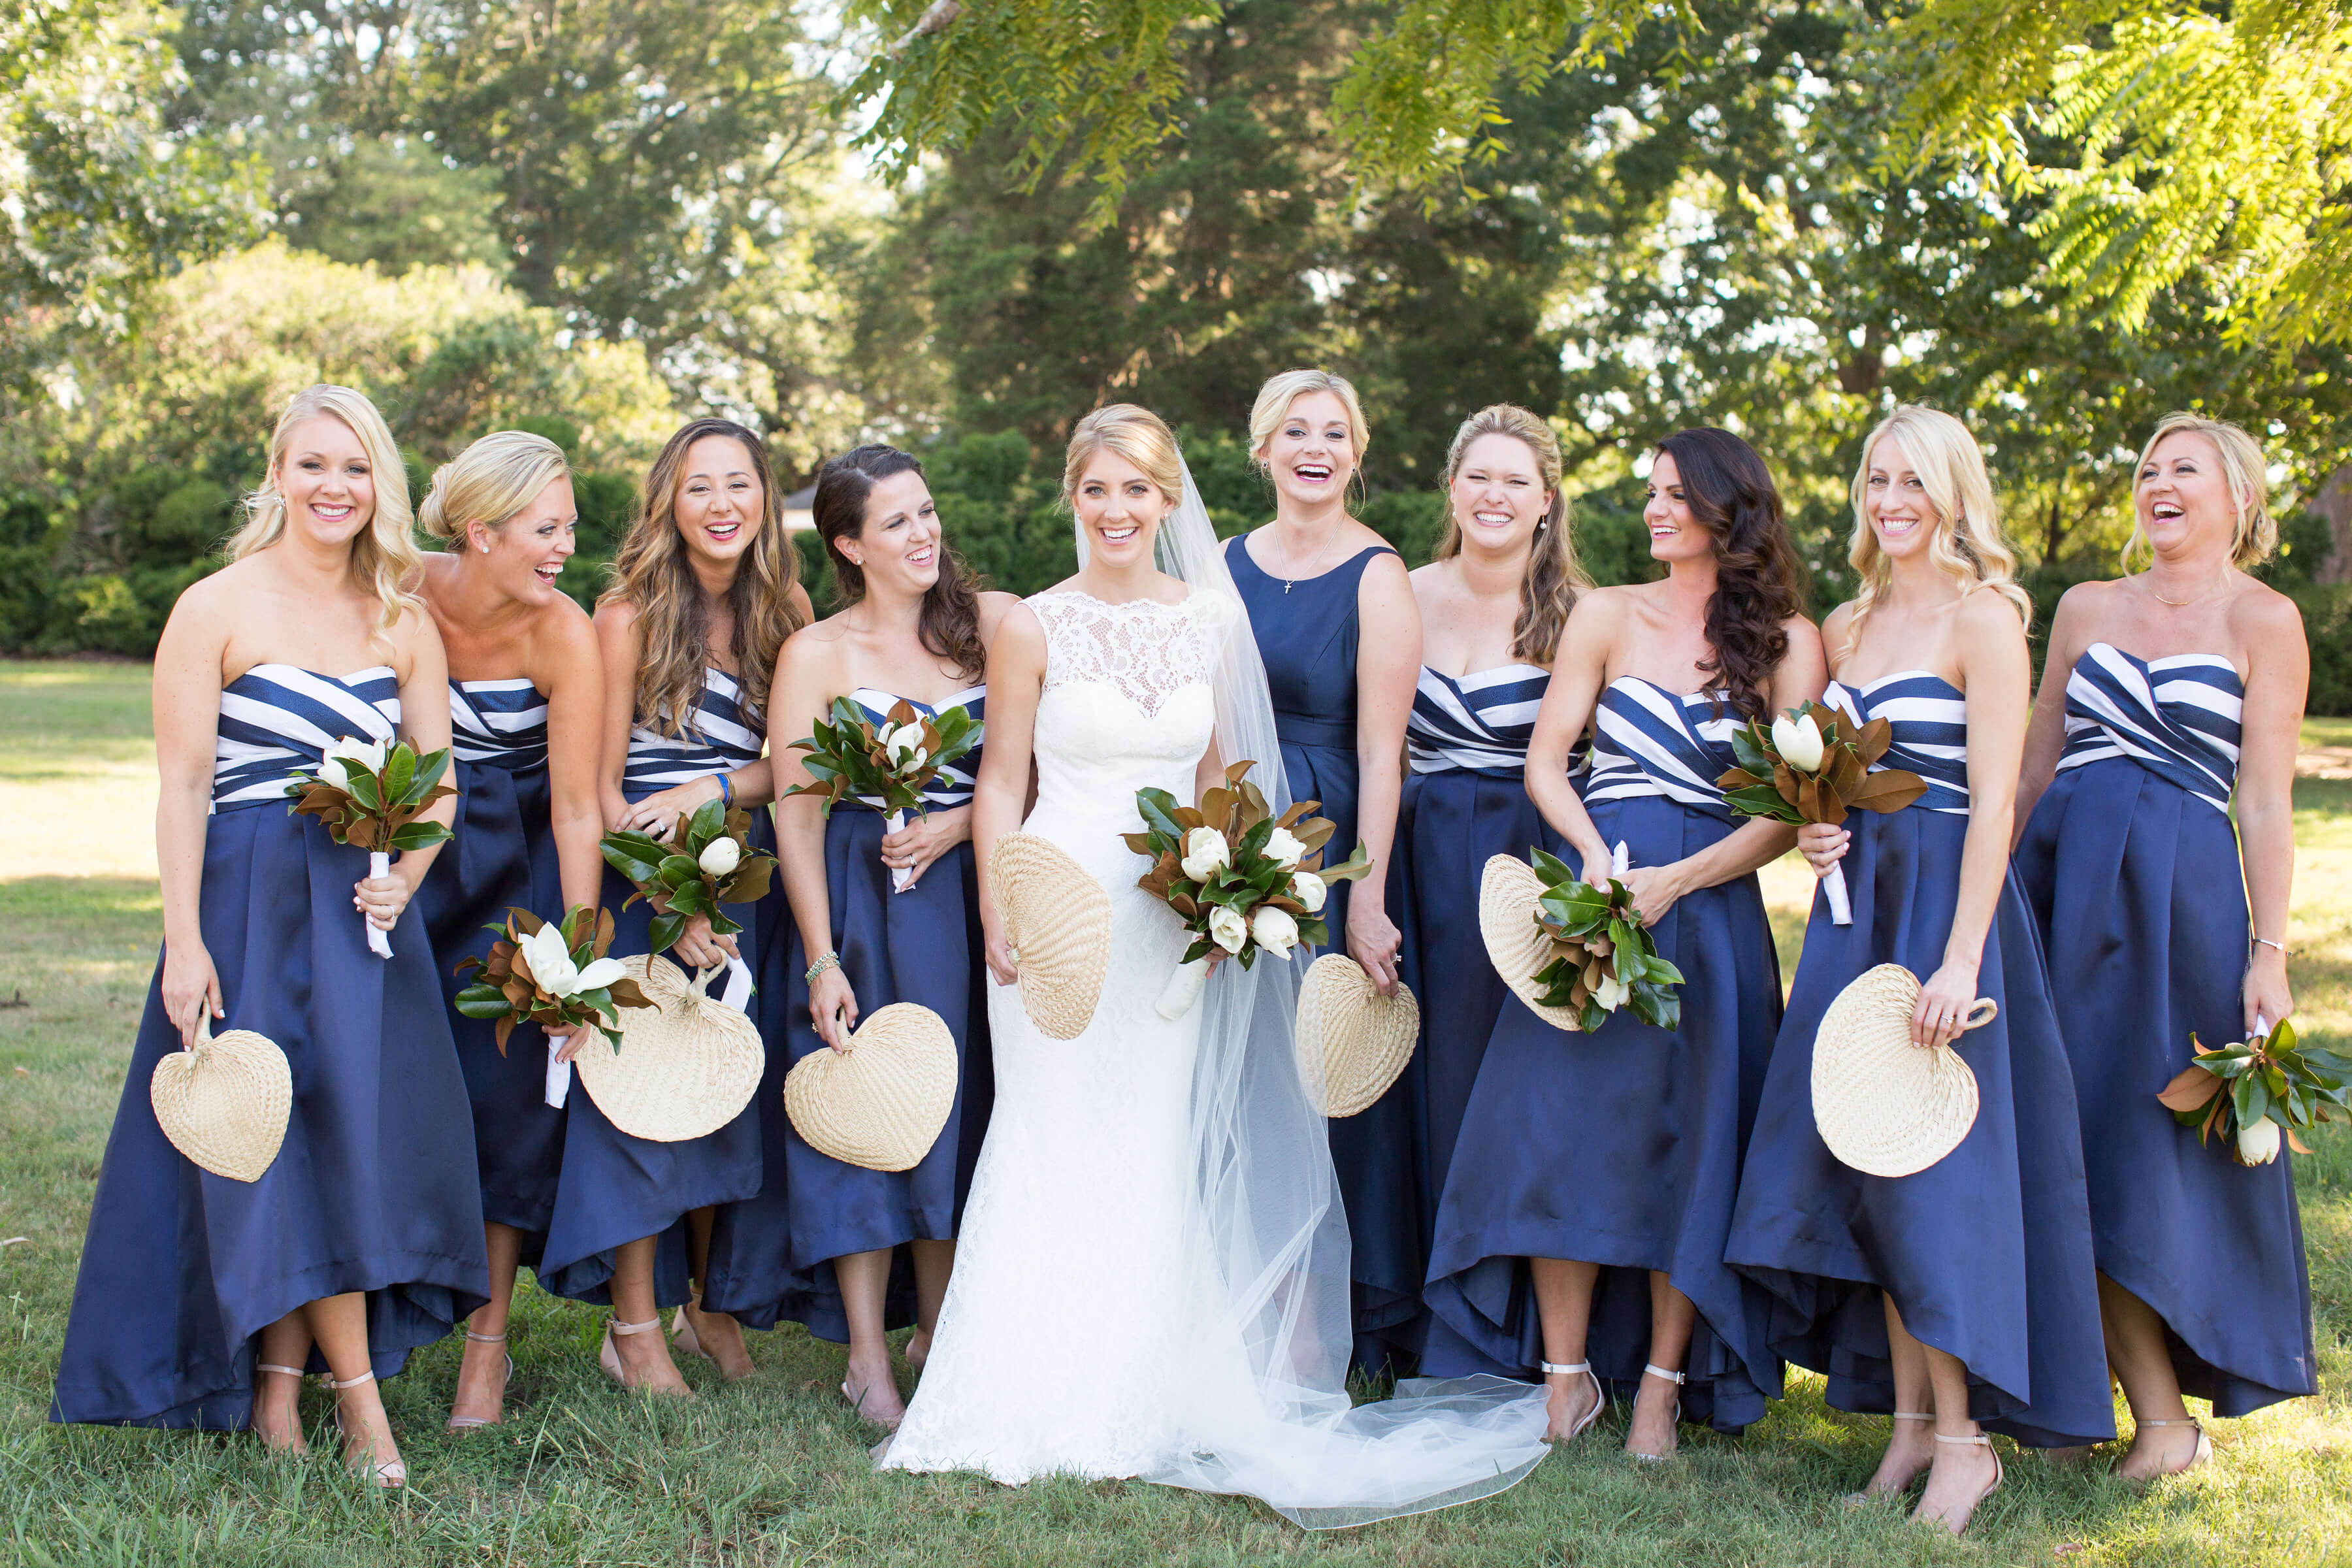 bride with navy and white striped bridesmaids dresses